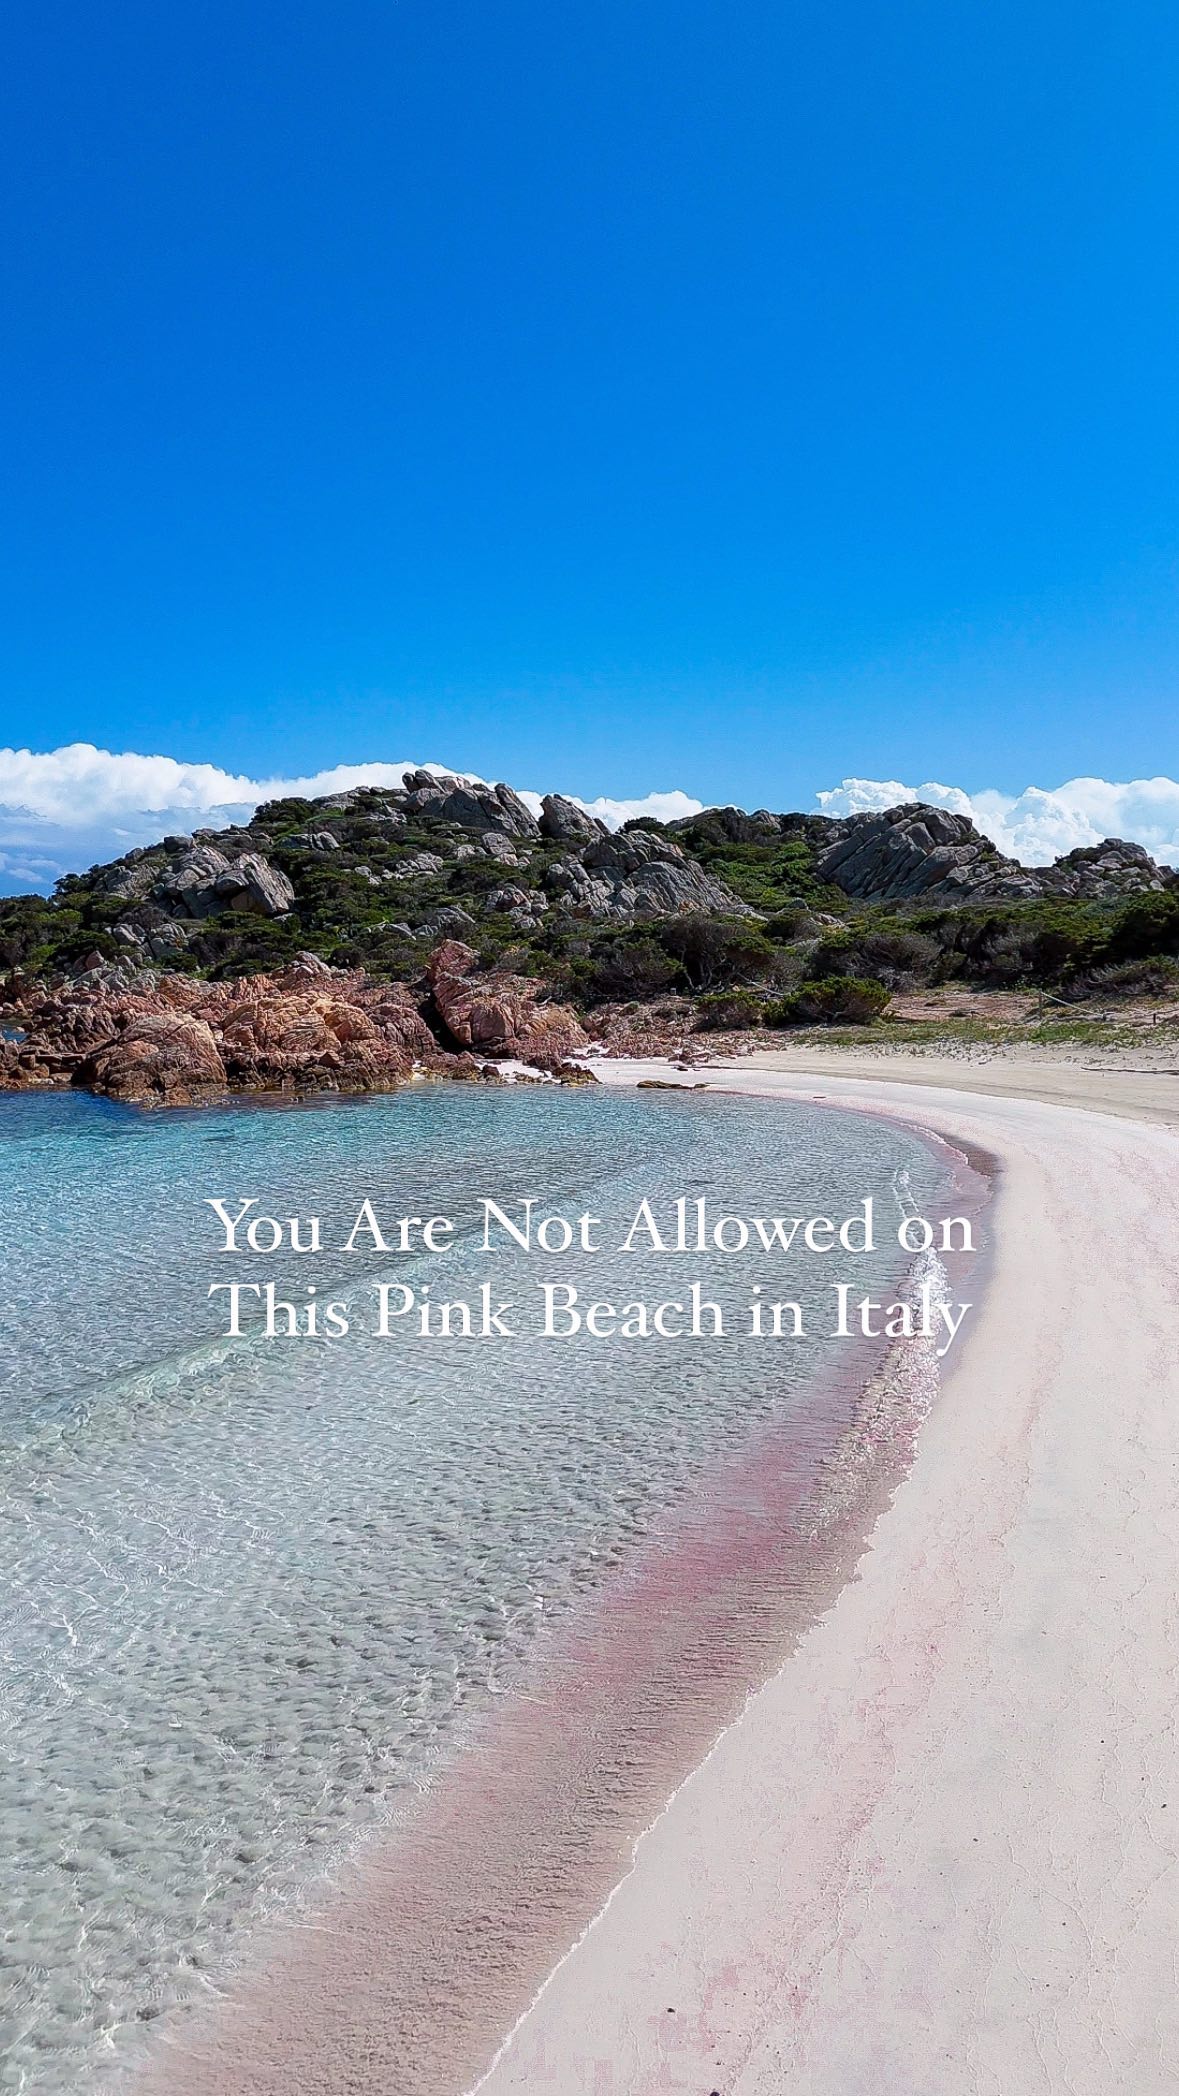 No one is allowed on this pink sand beach in Italy, and I’m not even mad about it. Are you?

As you can probably guess, banning people is a way to preserve this rare beach, whose pink sand comes from coral, which, if you’ve seen coral lately, you know that color is becoming more and more rare. 😭

I was told people were taking sand as souvenirs as well, and I know most people don’t know that it’s bad to do that, sooooo now you know! Don’t take sand or rocks or shells off the beach please!

Anyway, there’s still a pretty pathway here that gives you some nice views of the beach but it’s usually only reachable in low season. 

Either way, thanks to Dronita 4.0 we can see this beautiful beach up close!

📍Spiaggia Rosa, La Maddalena Islands, Sardinia Italy

For info on getting here and Sardinia in general, check my blog post out on my bio! You can also tap my photos for corresponding blog posts!

This trip was part of my recent group trip for past guests! For more info check my group trip account!

#spiaggiarosa #ilovesardinia #sardegna #sardegnamylove #lamaddalena #lamaddalenaisland #palausardegna #italy #mylifesatravelmovie #mylifesatraveltribe